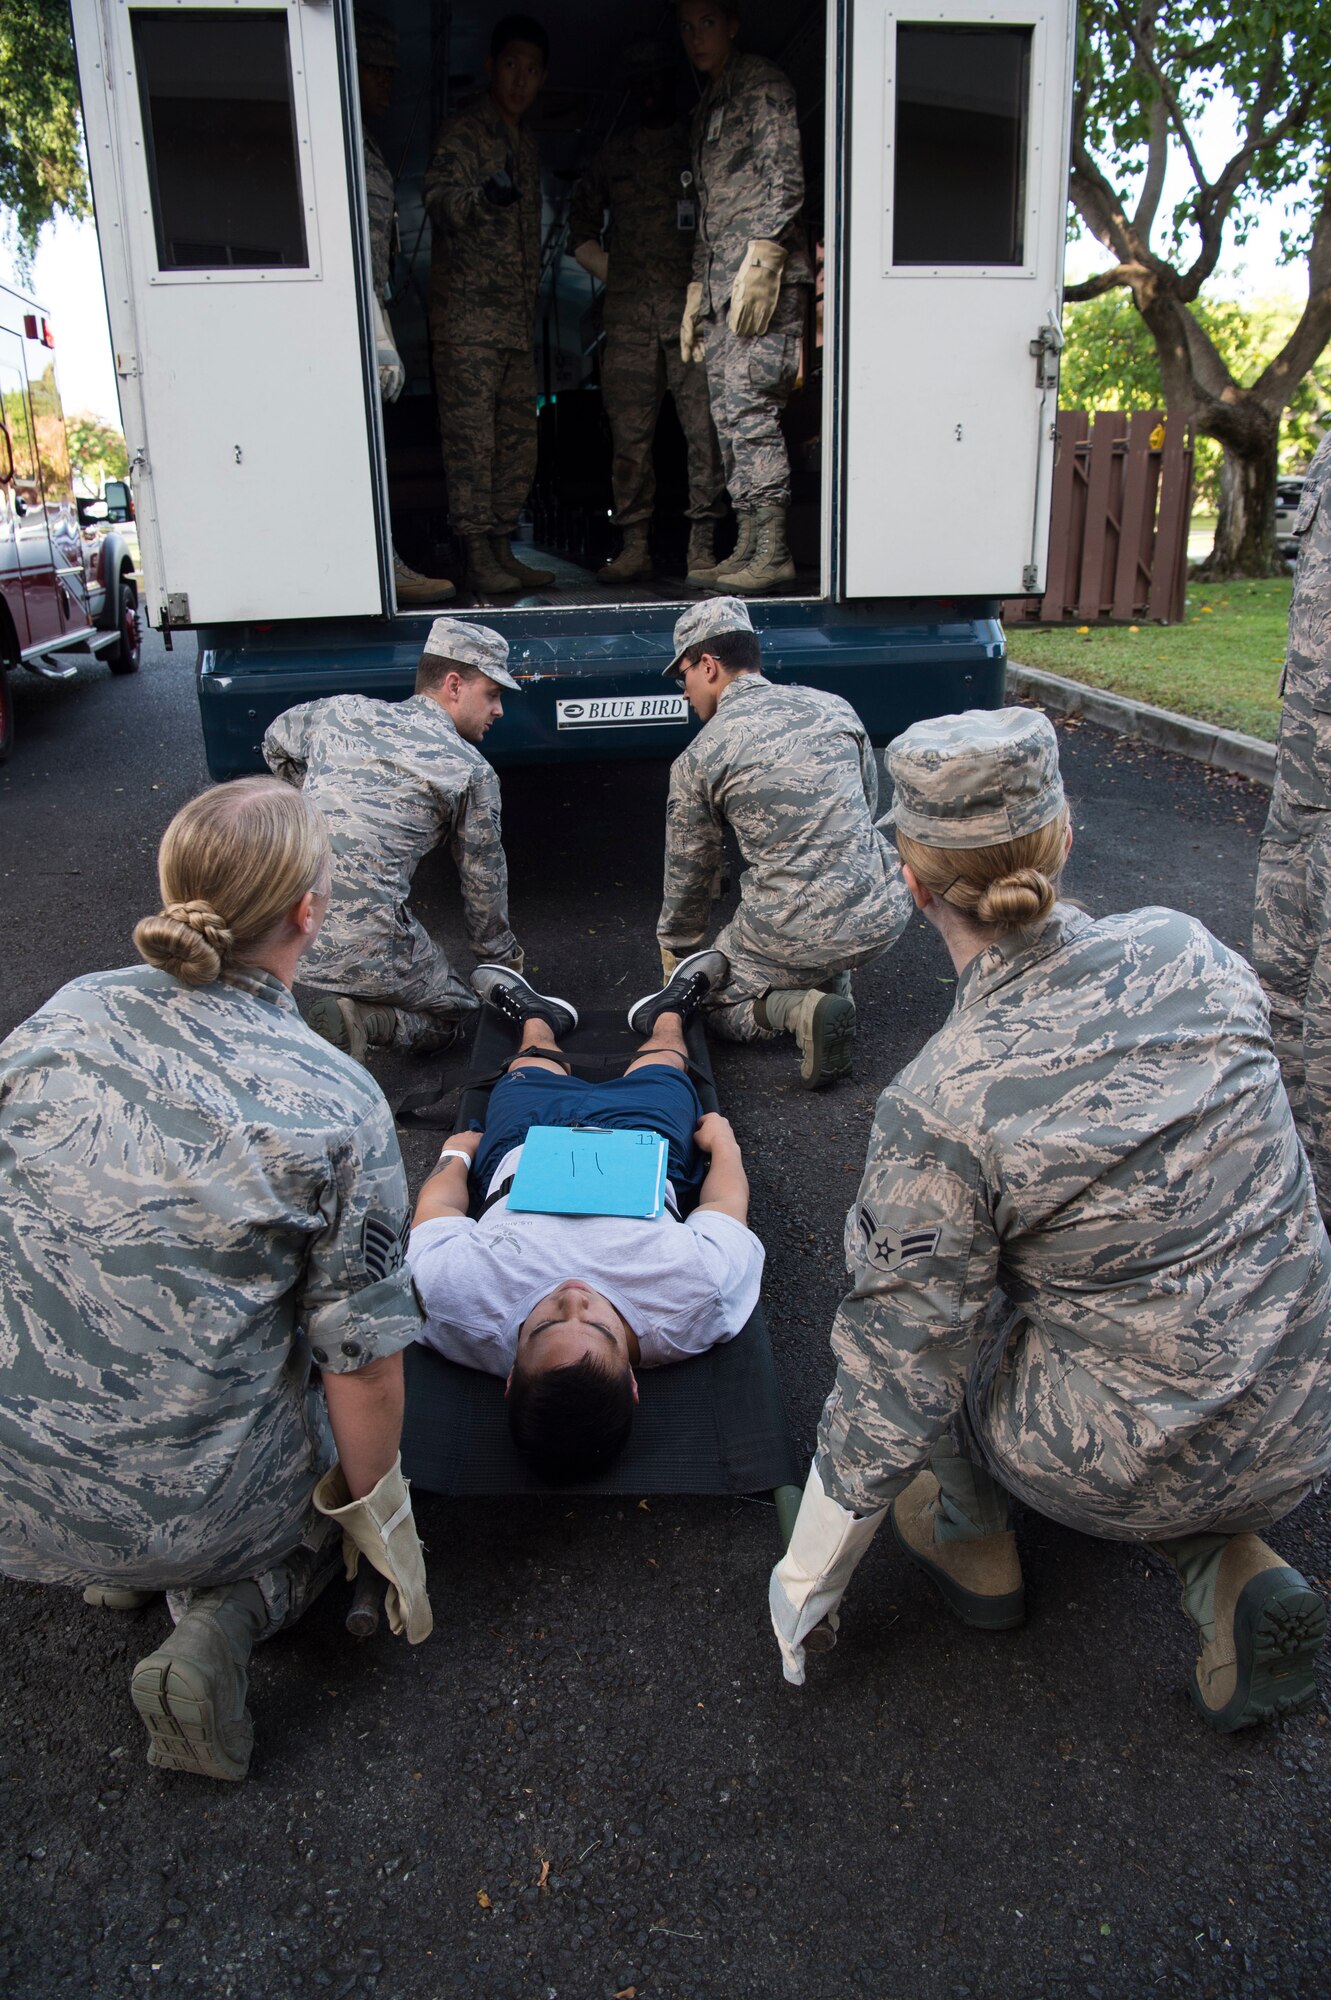 Airmen from the 15th Medical Group, work together to load mock casualties into a medical evacuation bus during a mass-casualty scenario for Rim of the Pacific exercise, Joint Base Pearl Harbor-Hickam, July 12. Twenty-five nations, 46 ships, five submarines, about 200 aircraft and 25,000 personnel are participating in RIMPAC from June 27 to Aug. 2 in and around the Hawaiian Islands and Southern California. The world’s largest international maritime exercise, RIMPAC provides a unique training opportunity while fostering and sustaining cooperative relationships among participants critical to ensuring the safety of sea lanes and security of the world’s oceans. RIMPAC 2018 is the 26th exercise in the series that began in 1971. (U.S. Air Force photo by Tech. Sgt. Heather Redman/Released)